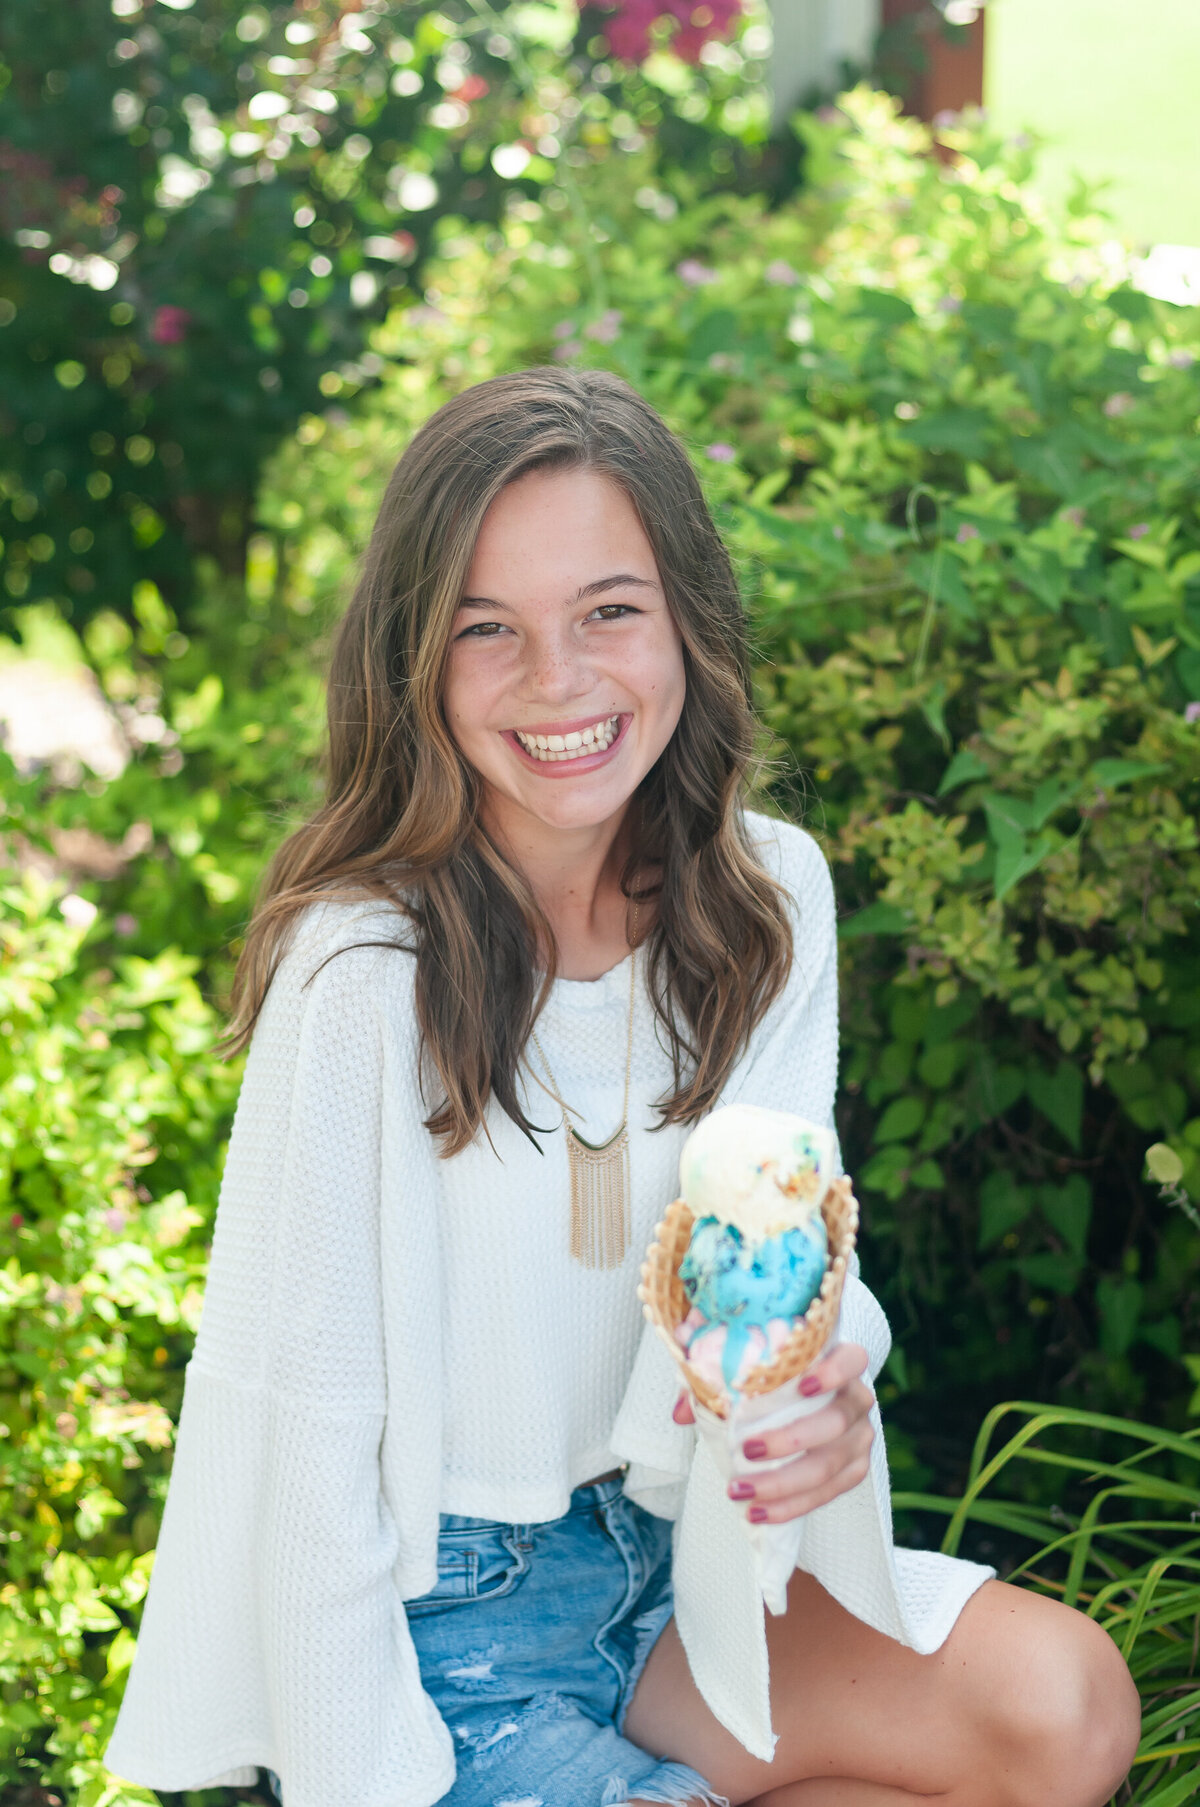 Kentucky Photographers: Portrait of a girl holding an ice cream cone at Chaney's Dairy Barn.